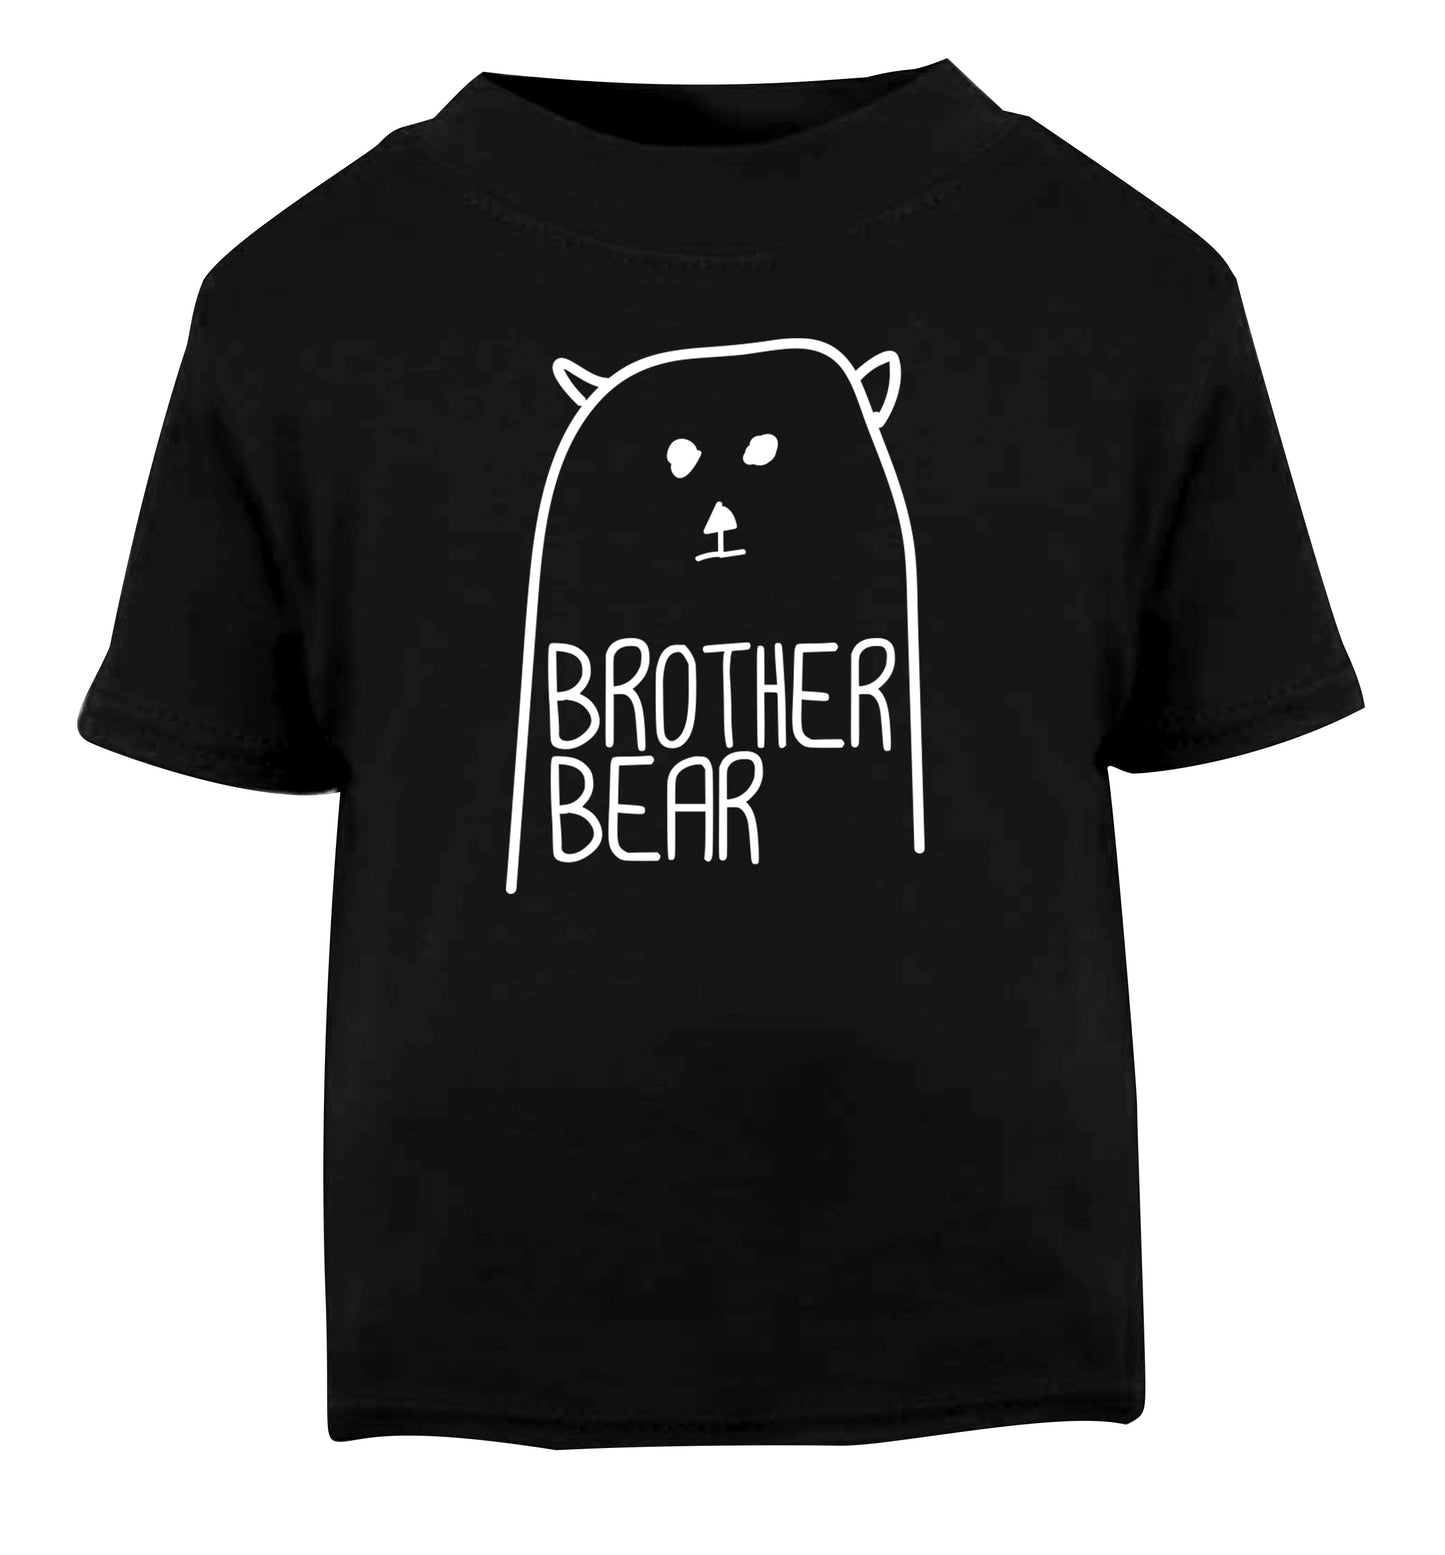 Brother bear Black Baby Toddler Tshirt 2 years